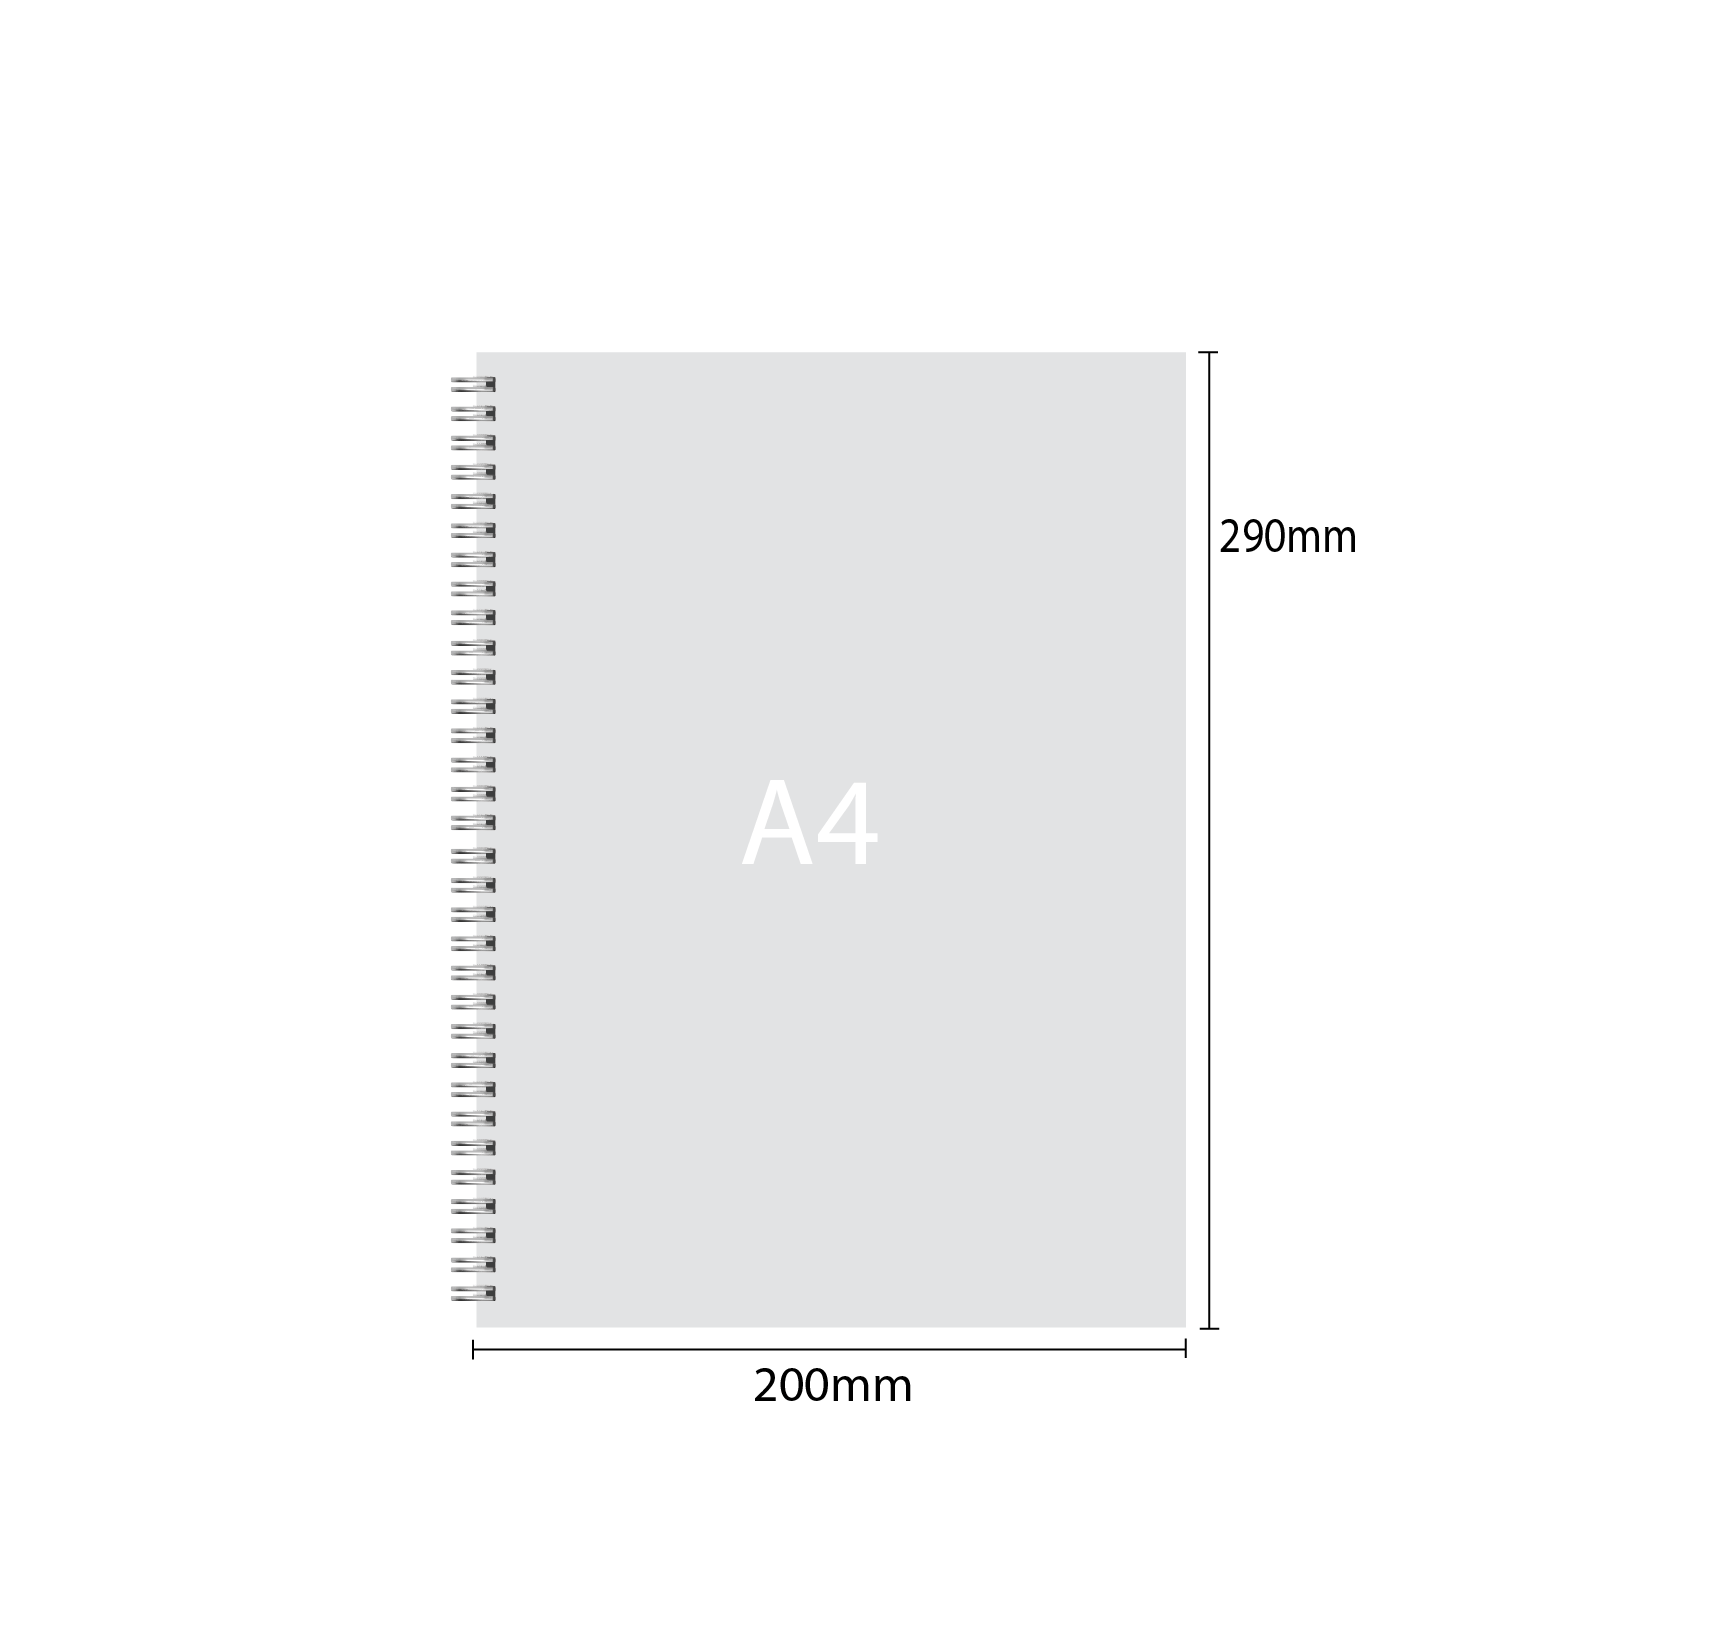 KHỔ A4 fit (200x290mm)